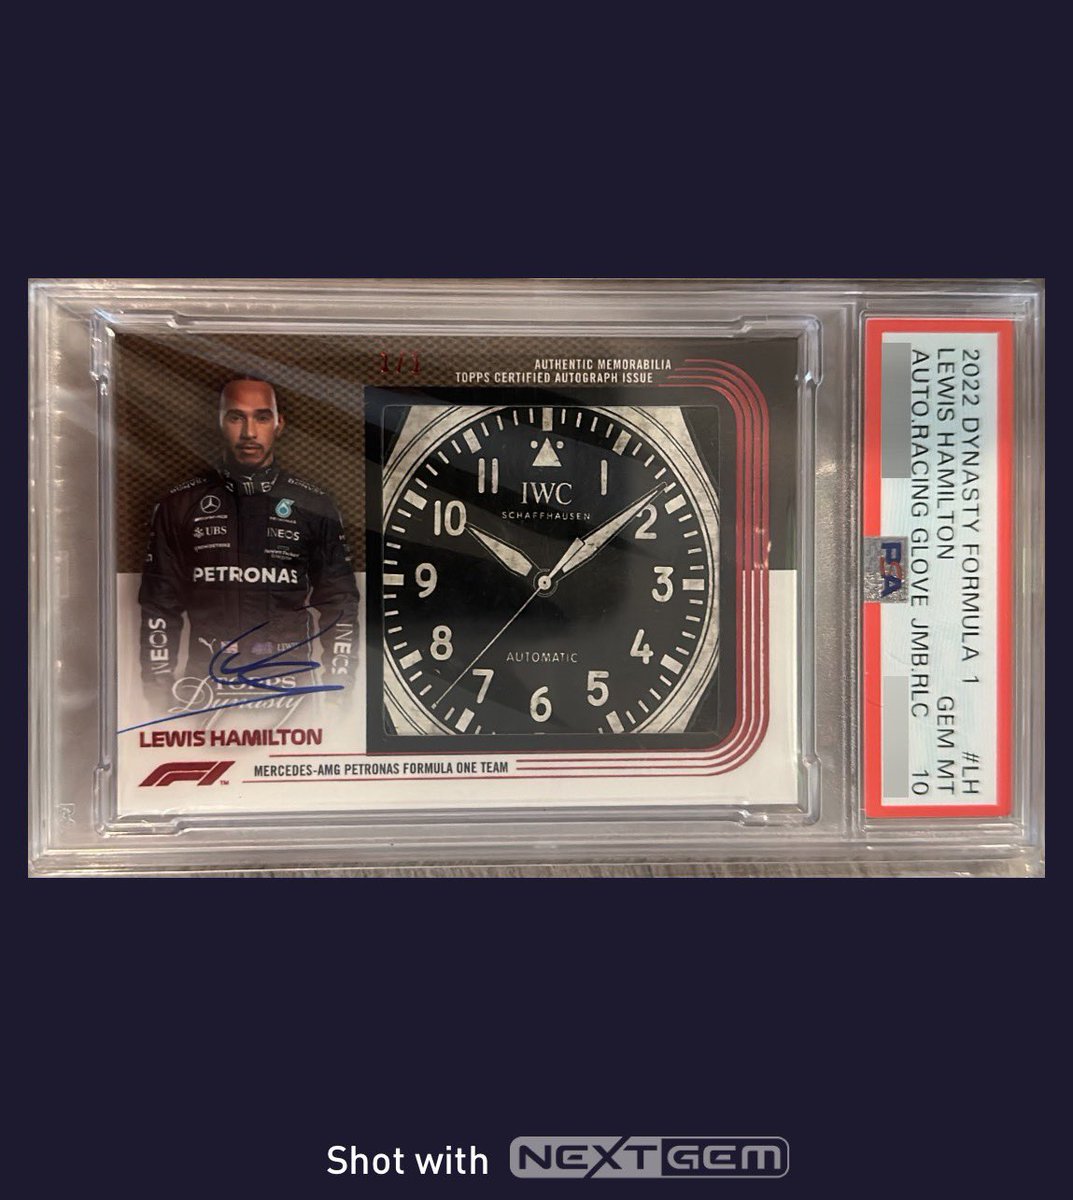 🤩 Better make an offer quickly on this one… LEWIS HAMILTON 2022 DYNASTY FORMULA 1 AUTO RACING GLOVE 1/1 PSA 10 🔥 my.nextgem.com/SweetPea/NG710…